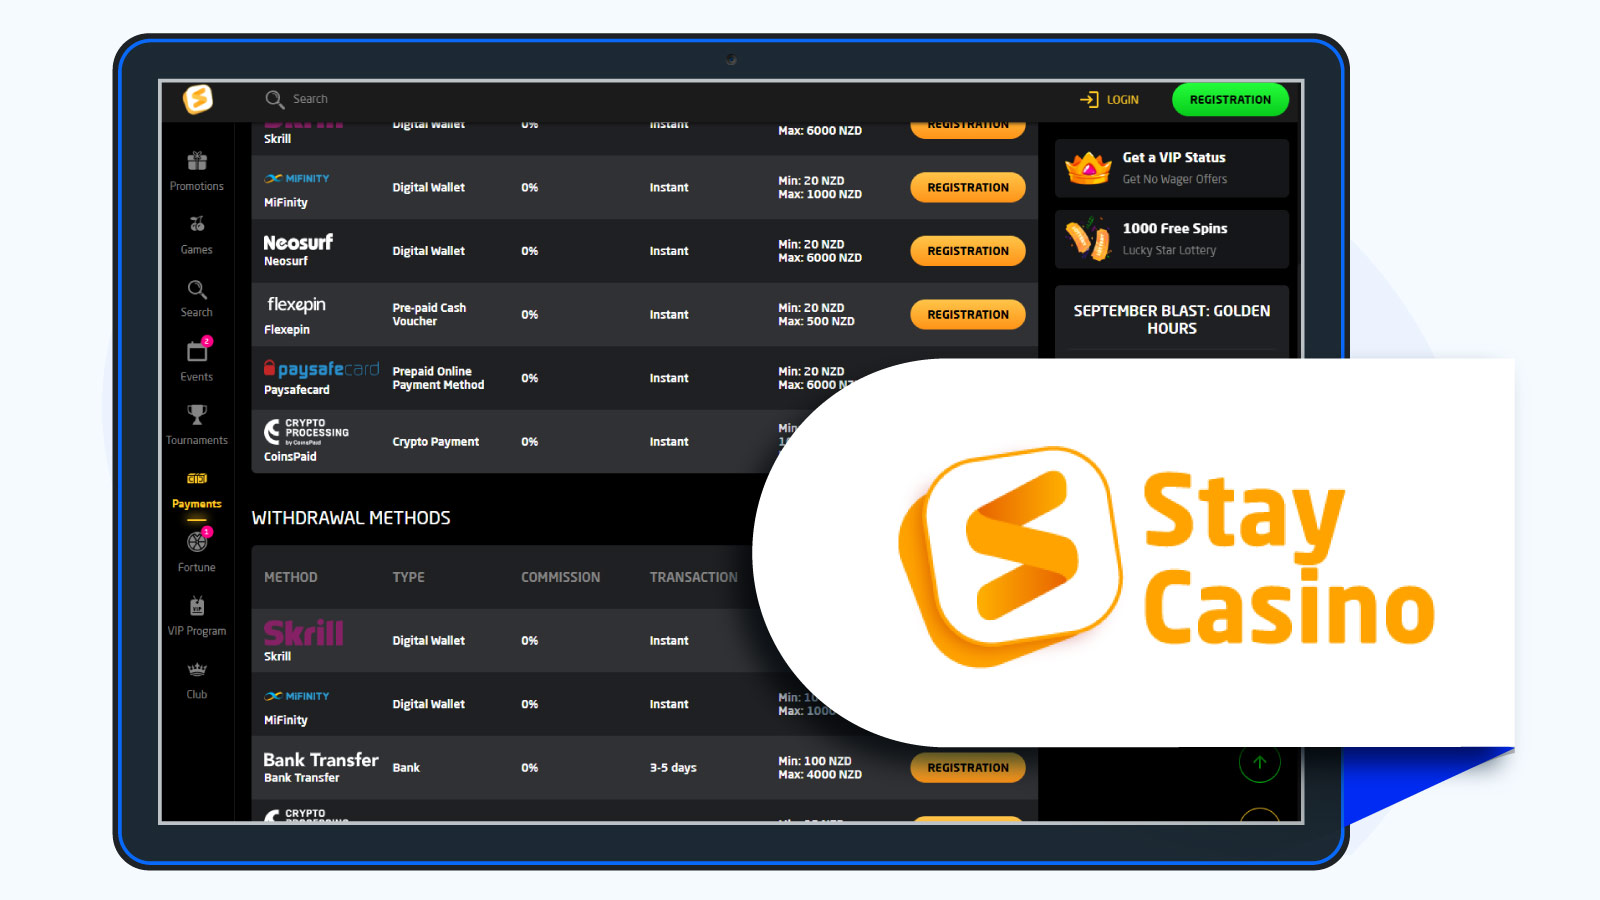 StayCasino – Best for a variety of fast payment methods